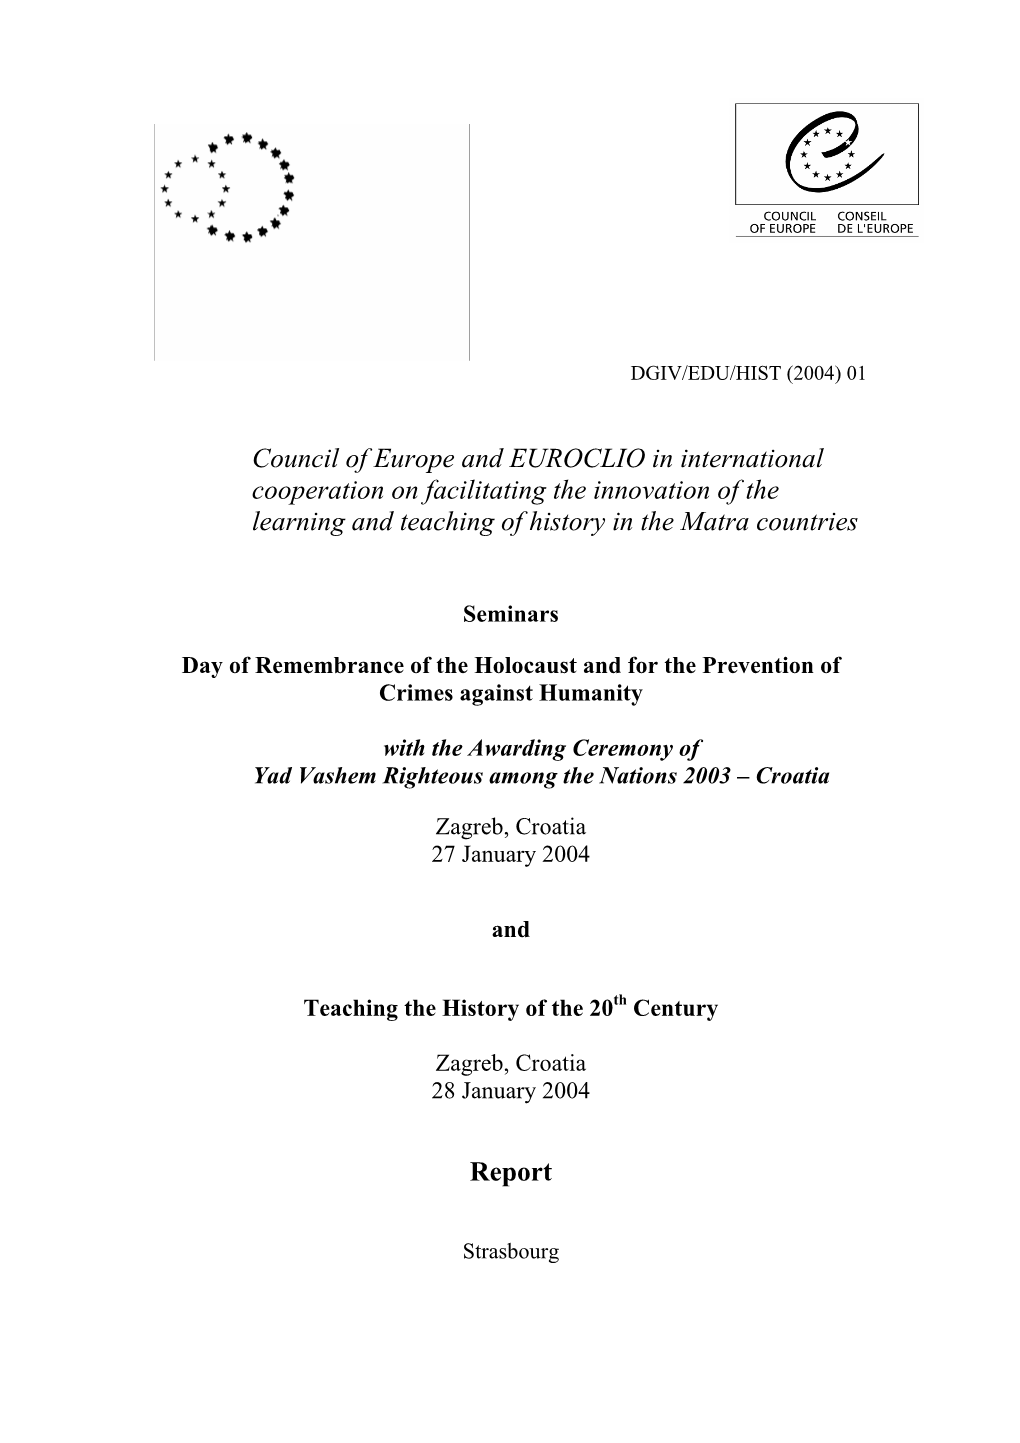 Council of Europe and EUROCLIO in International Cooperation on Facilitating the Innovation of the Learning and Teaching of History in the Matra Countries